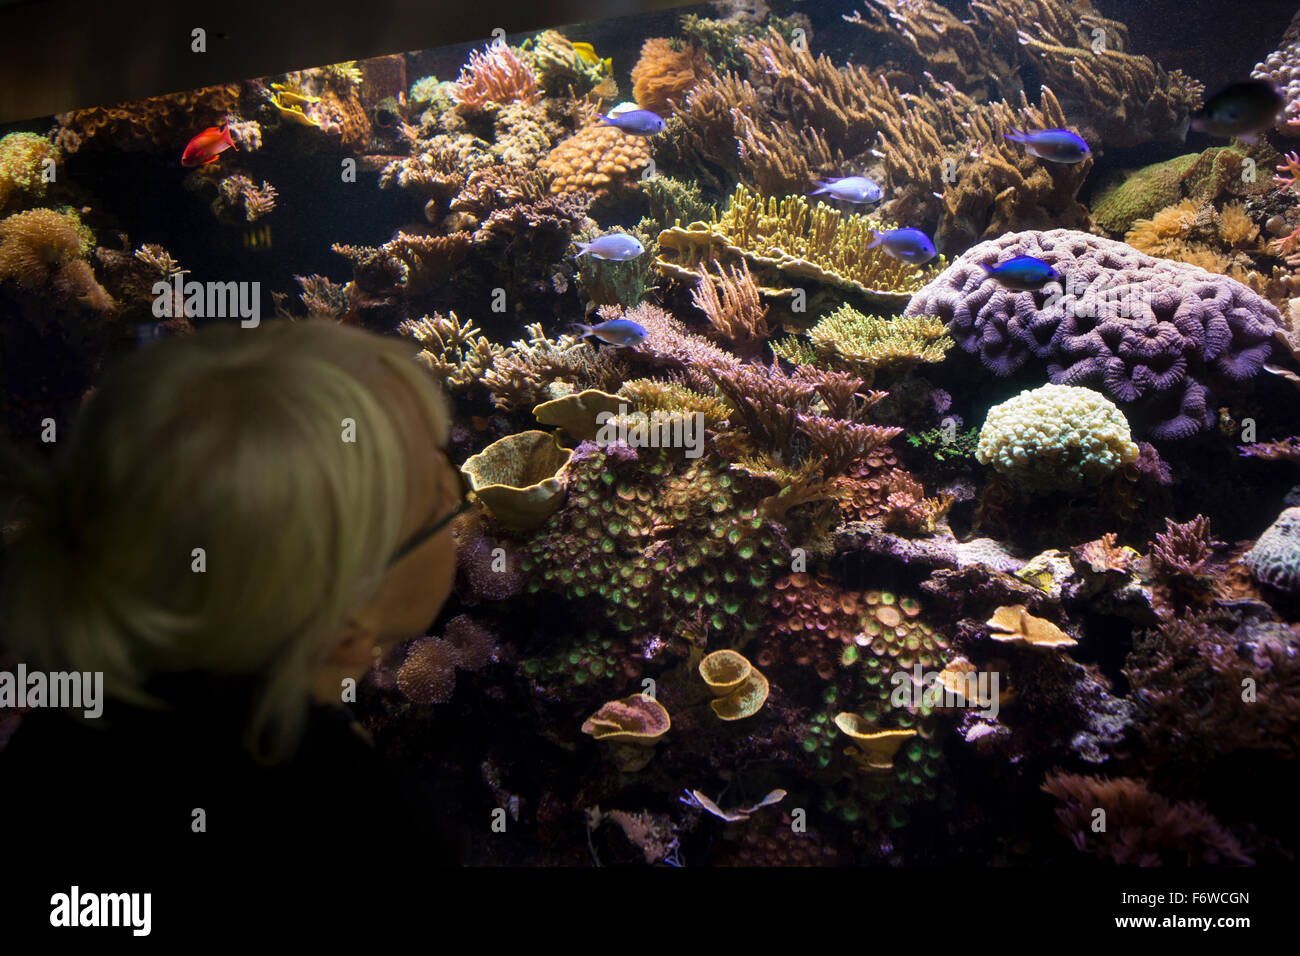 UK, England, Yorkshire, Hull, The Deep marine aquarium, Coral Reefs, visitor looking at colourful reef fish & corals Stock Photo